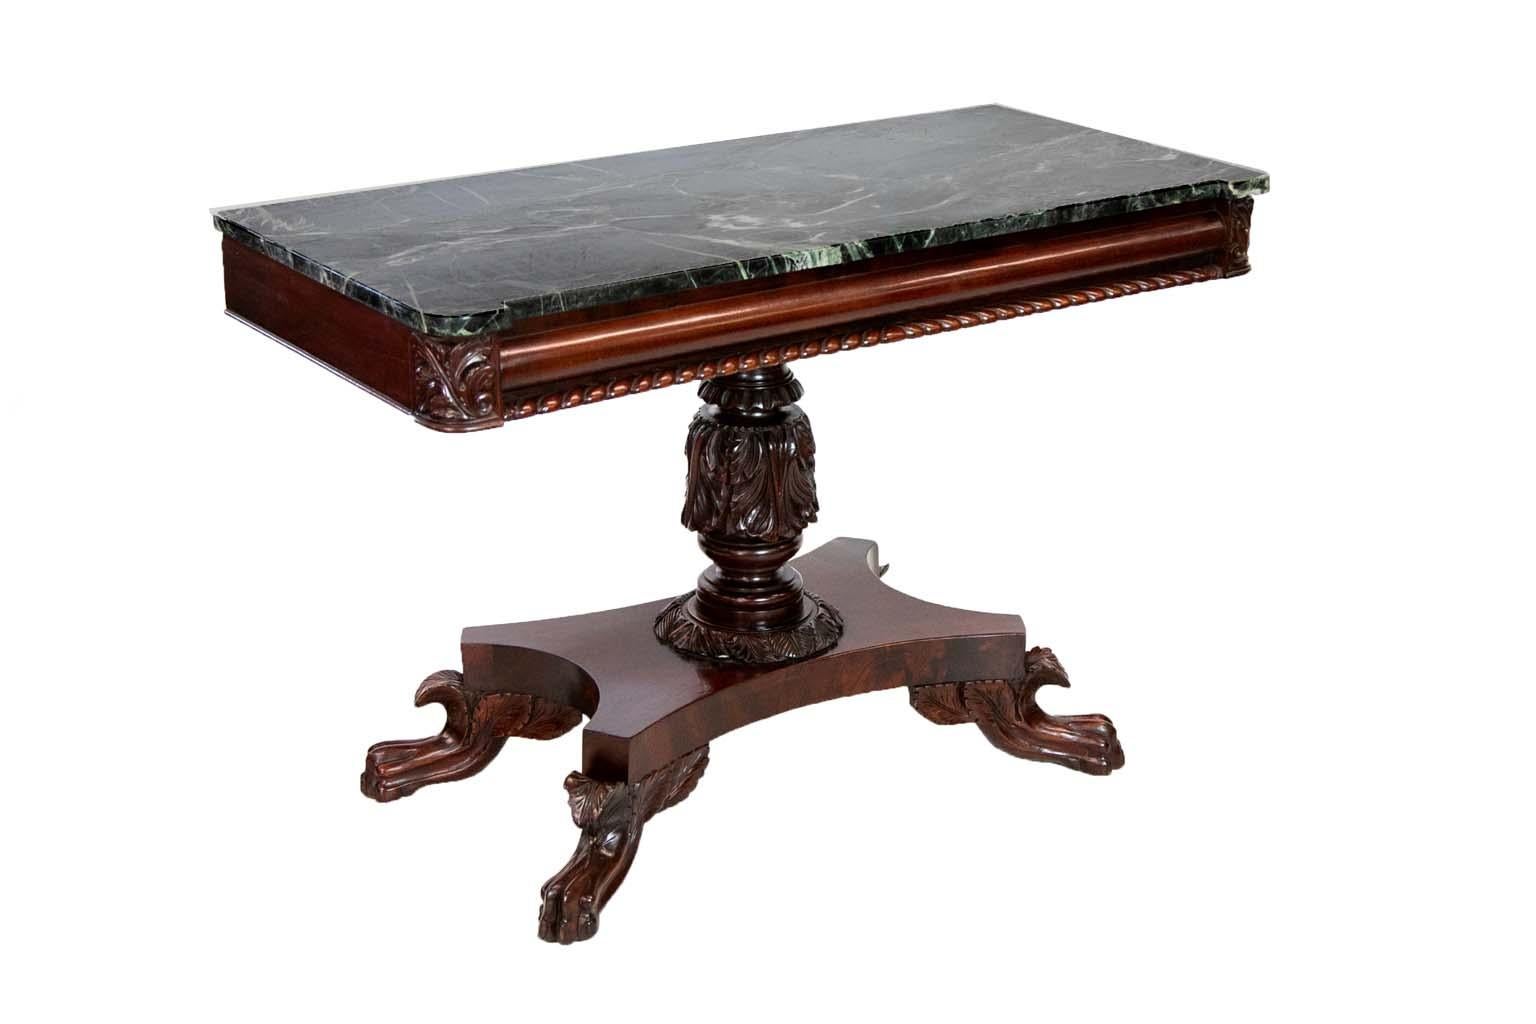 The front of this mahogany American empire console table has a cushion frieze above gadrooned molding. The corners have carved stylized acanthus leaves. The supporting stem has acanthus leaves carved in high relief. A platform base has concave edges